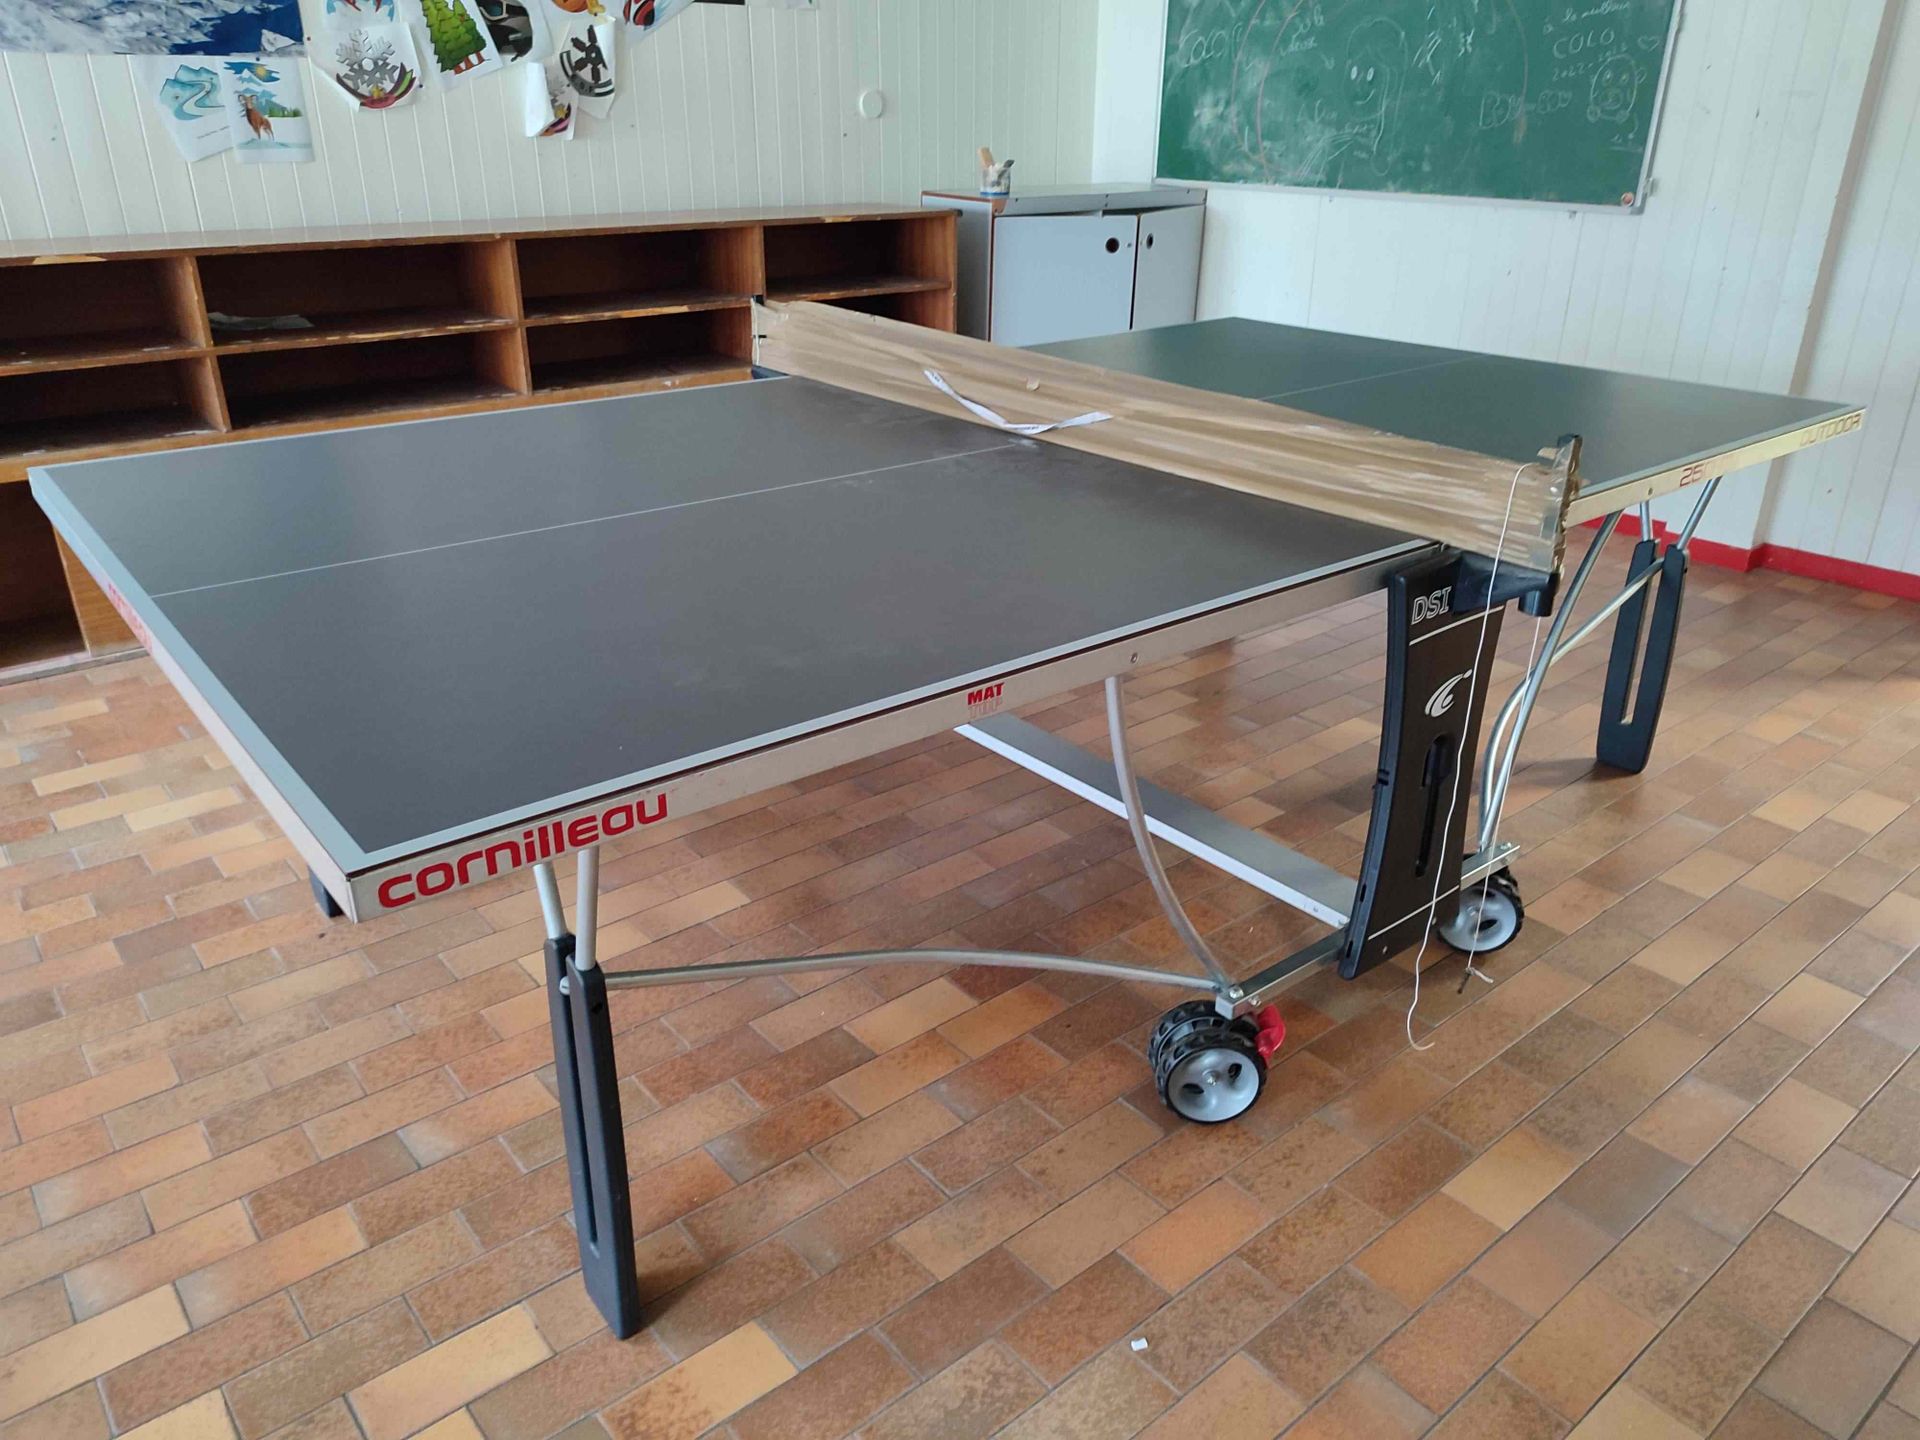 Null Table tennis table CORNILLEAU (plan to replace the net).
Visits authorized &hellip;